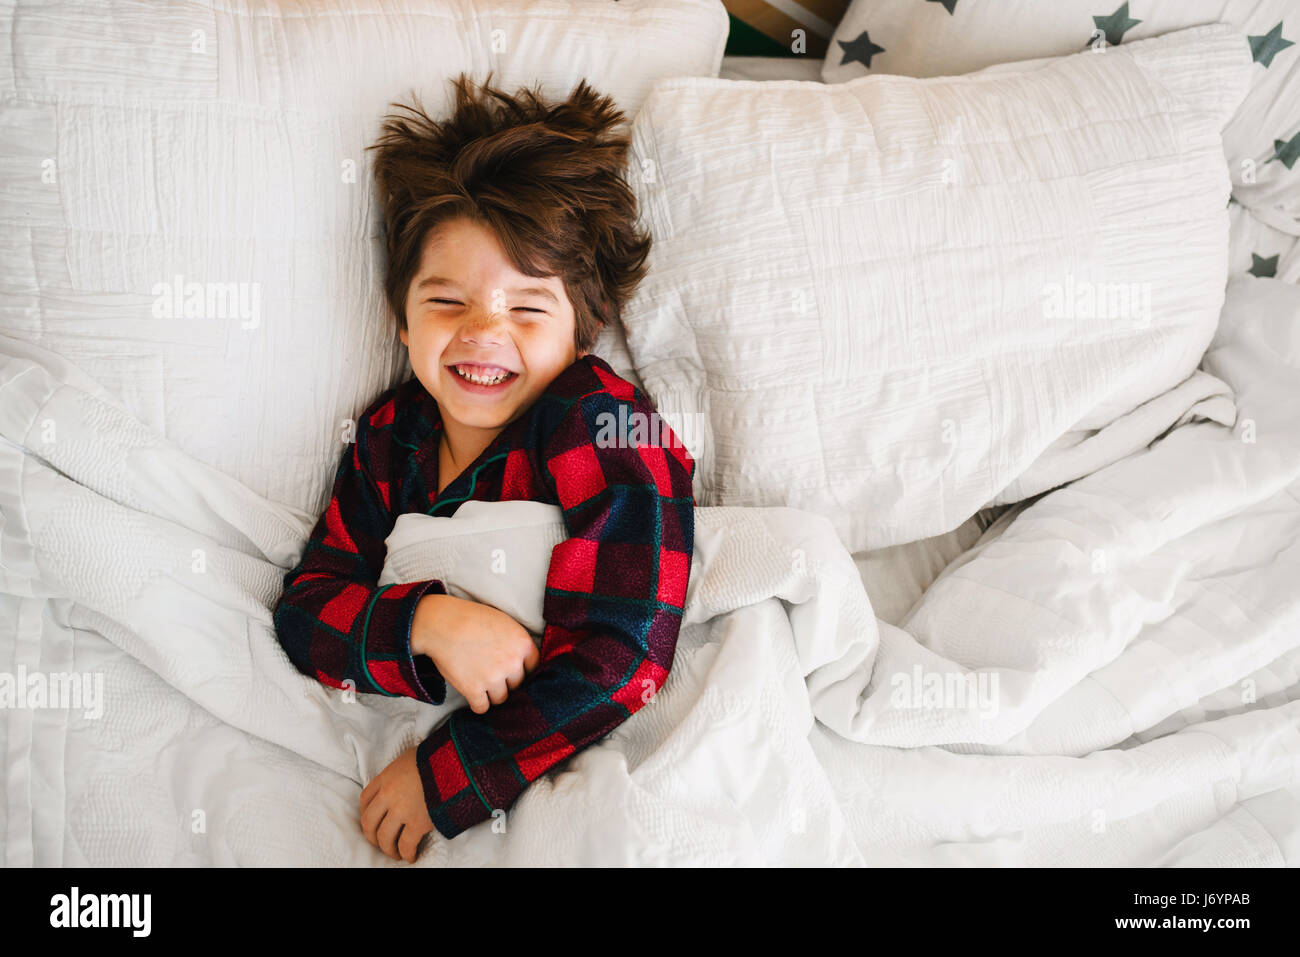 Portrait of a Boy Lying in Bed laughing Banque D'Images